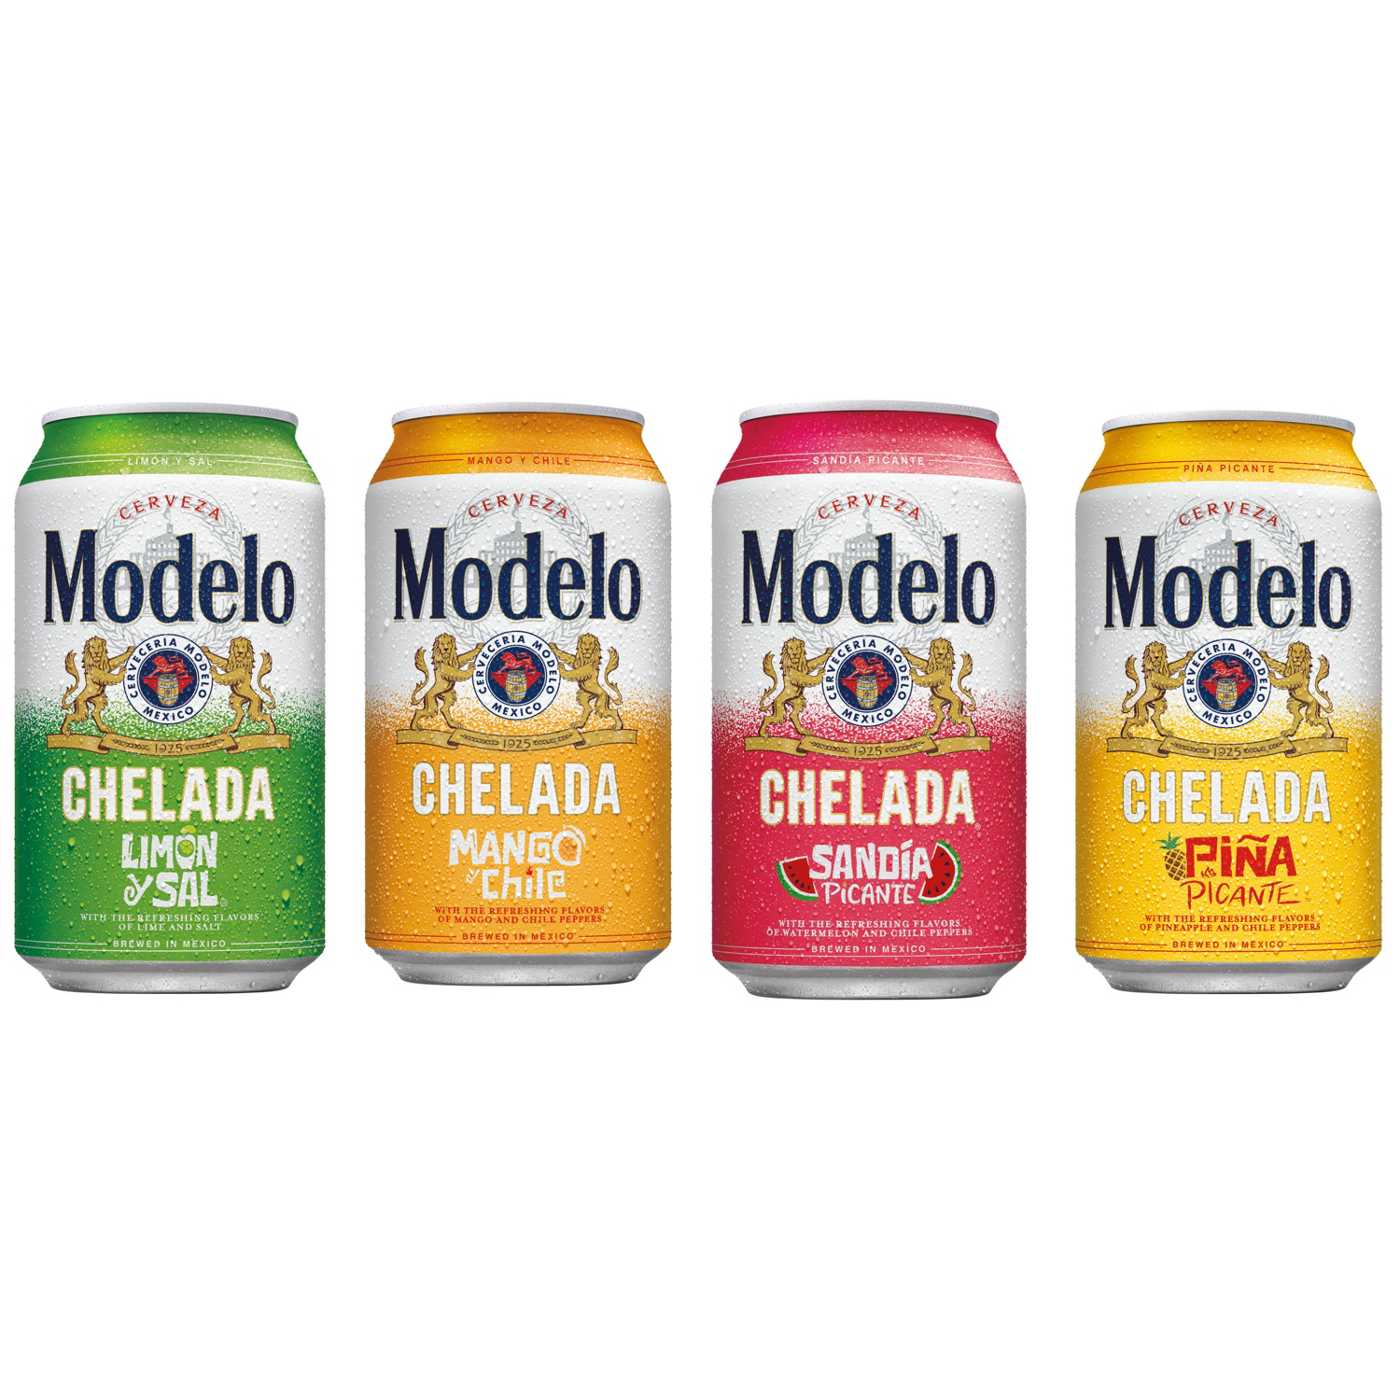 Modelo Chelada Variety Pack Mexican Import Flavored Beer 12 oz Cans, 12 pk; image 5 of 11